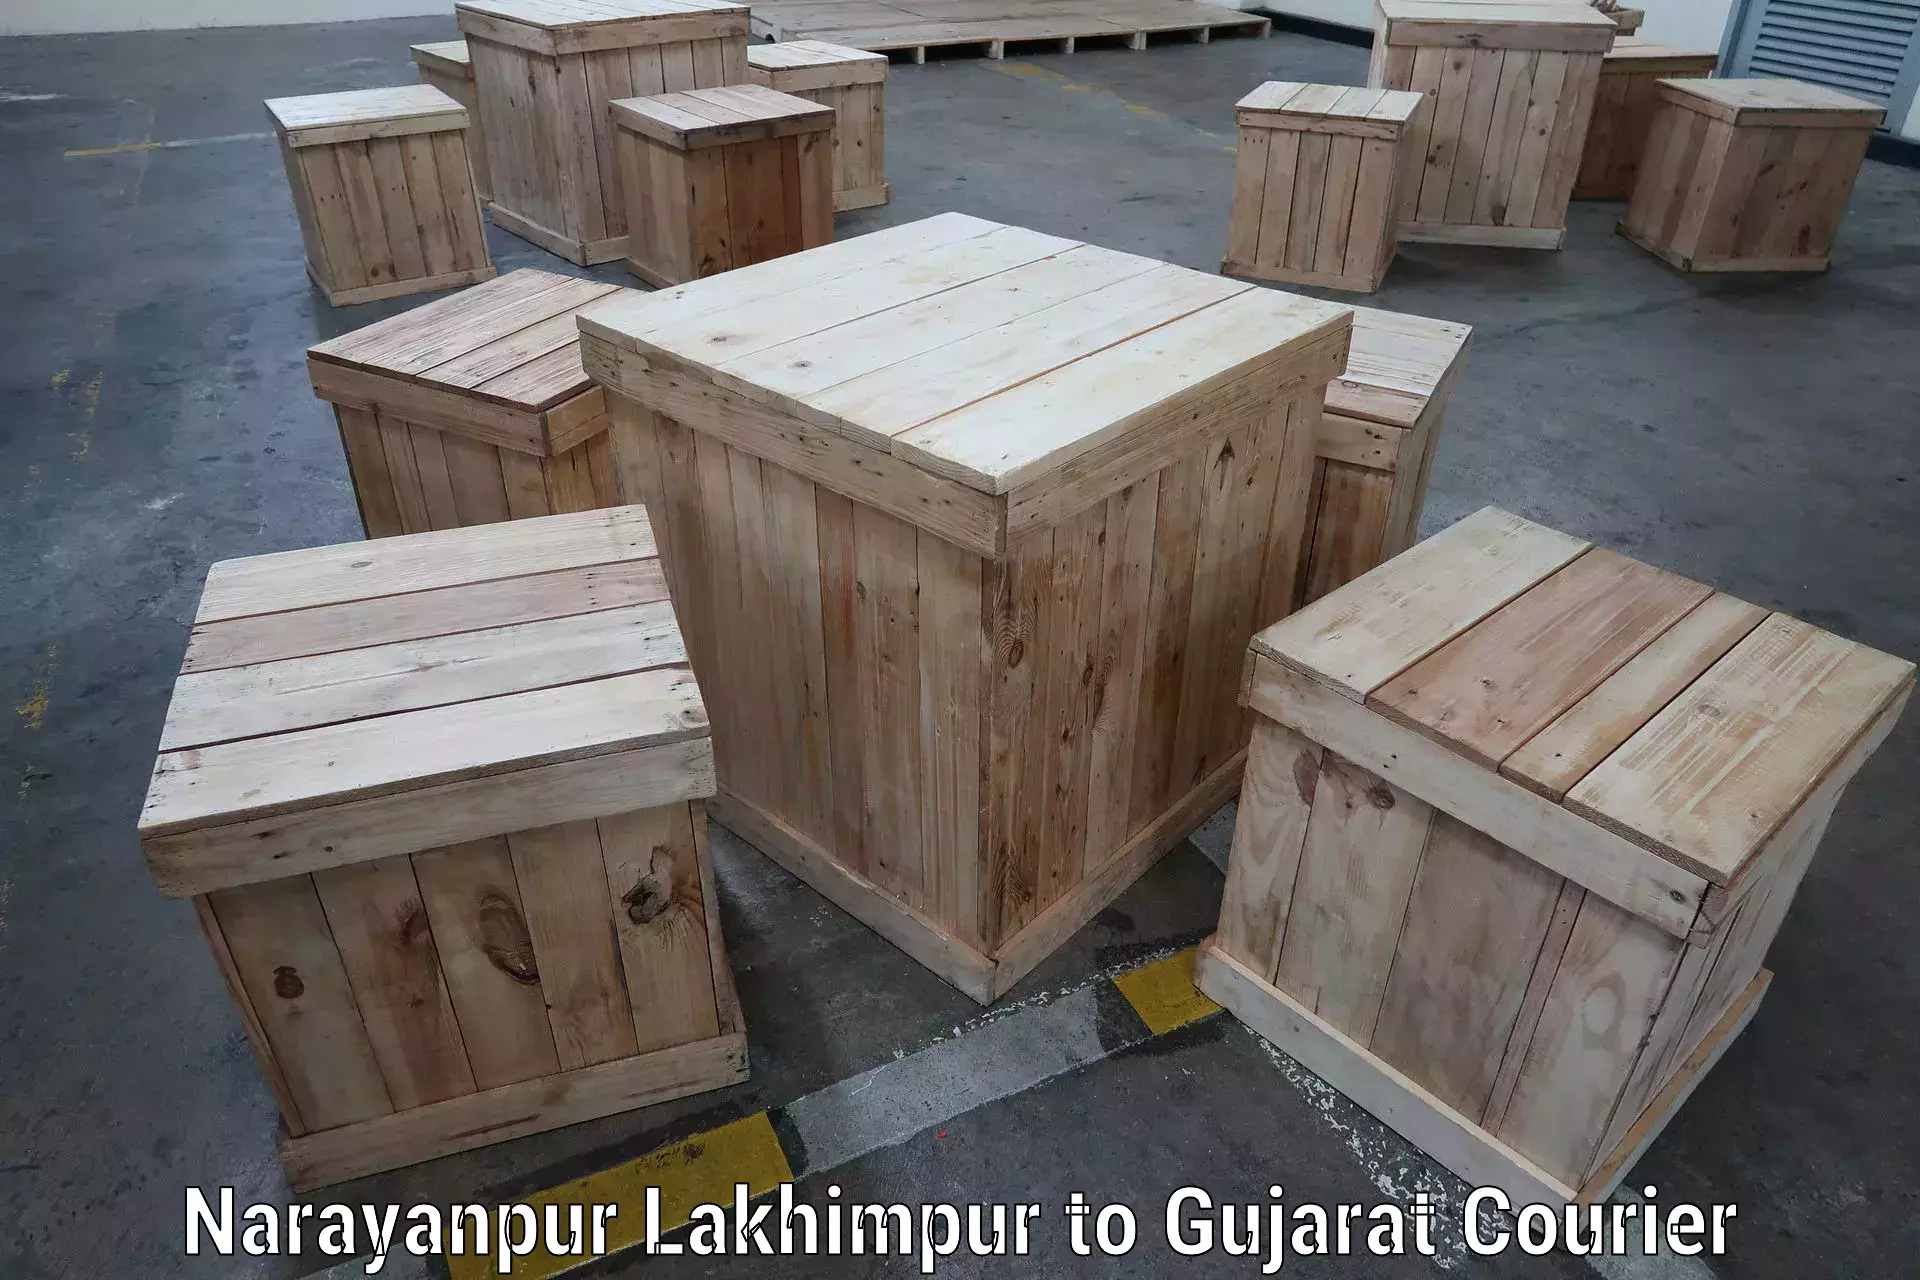 State-of-the-art courier technology Narayanpur Lakhimpur to Tarapur